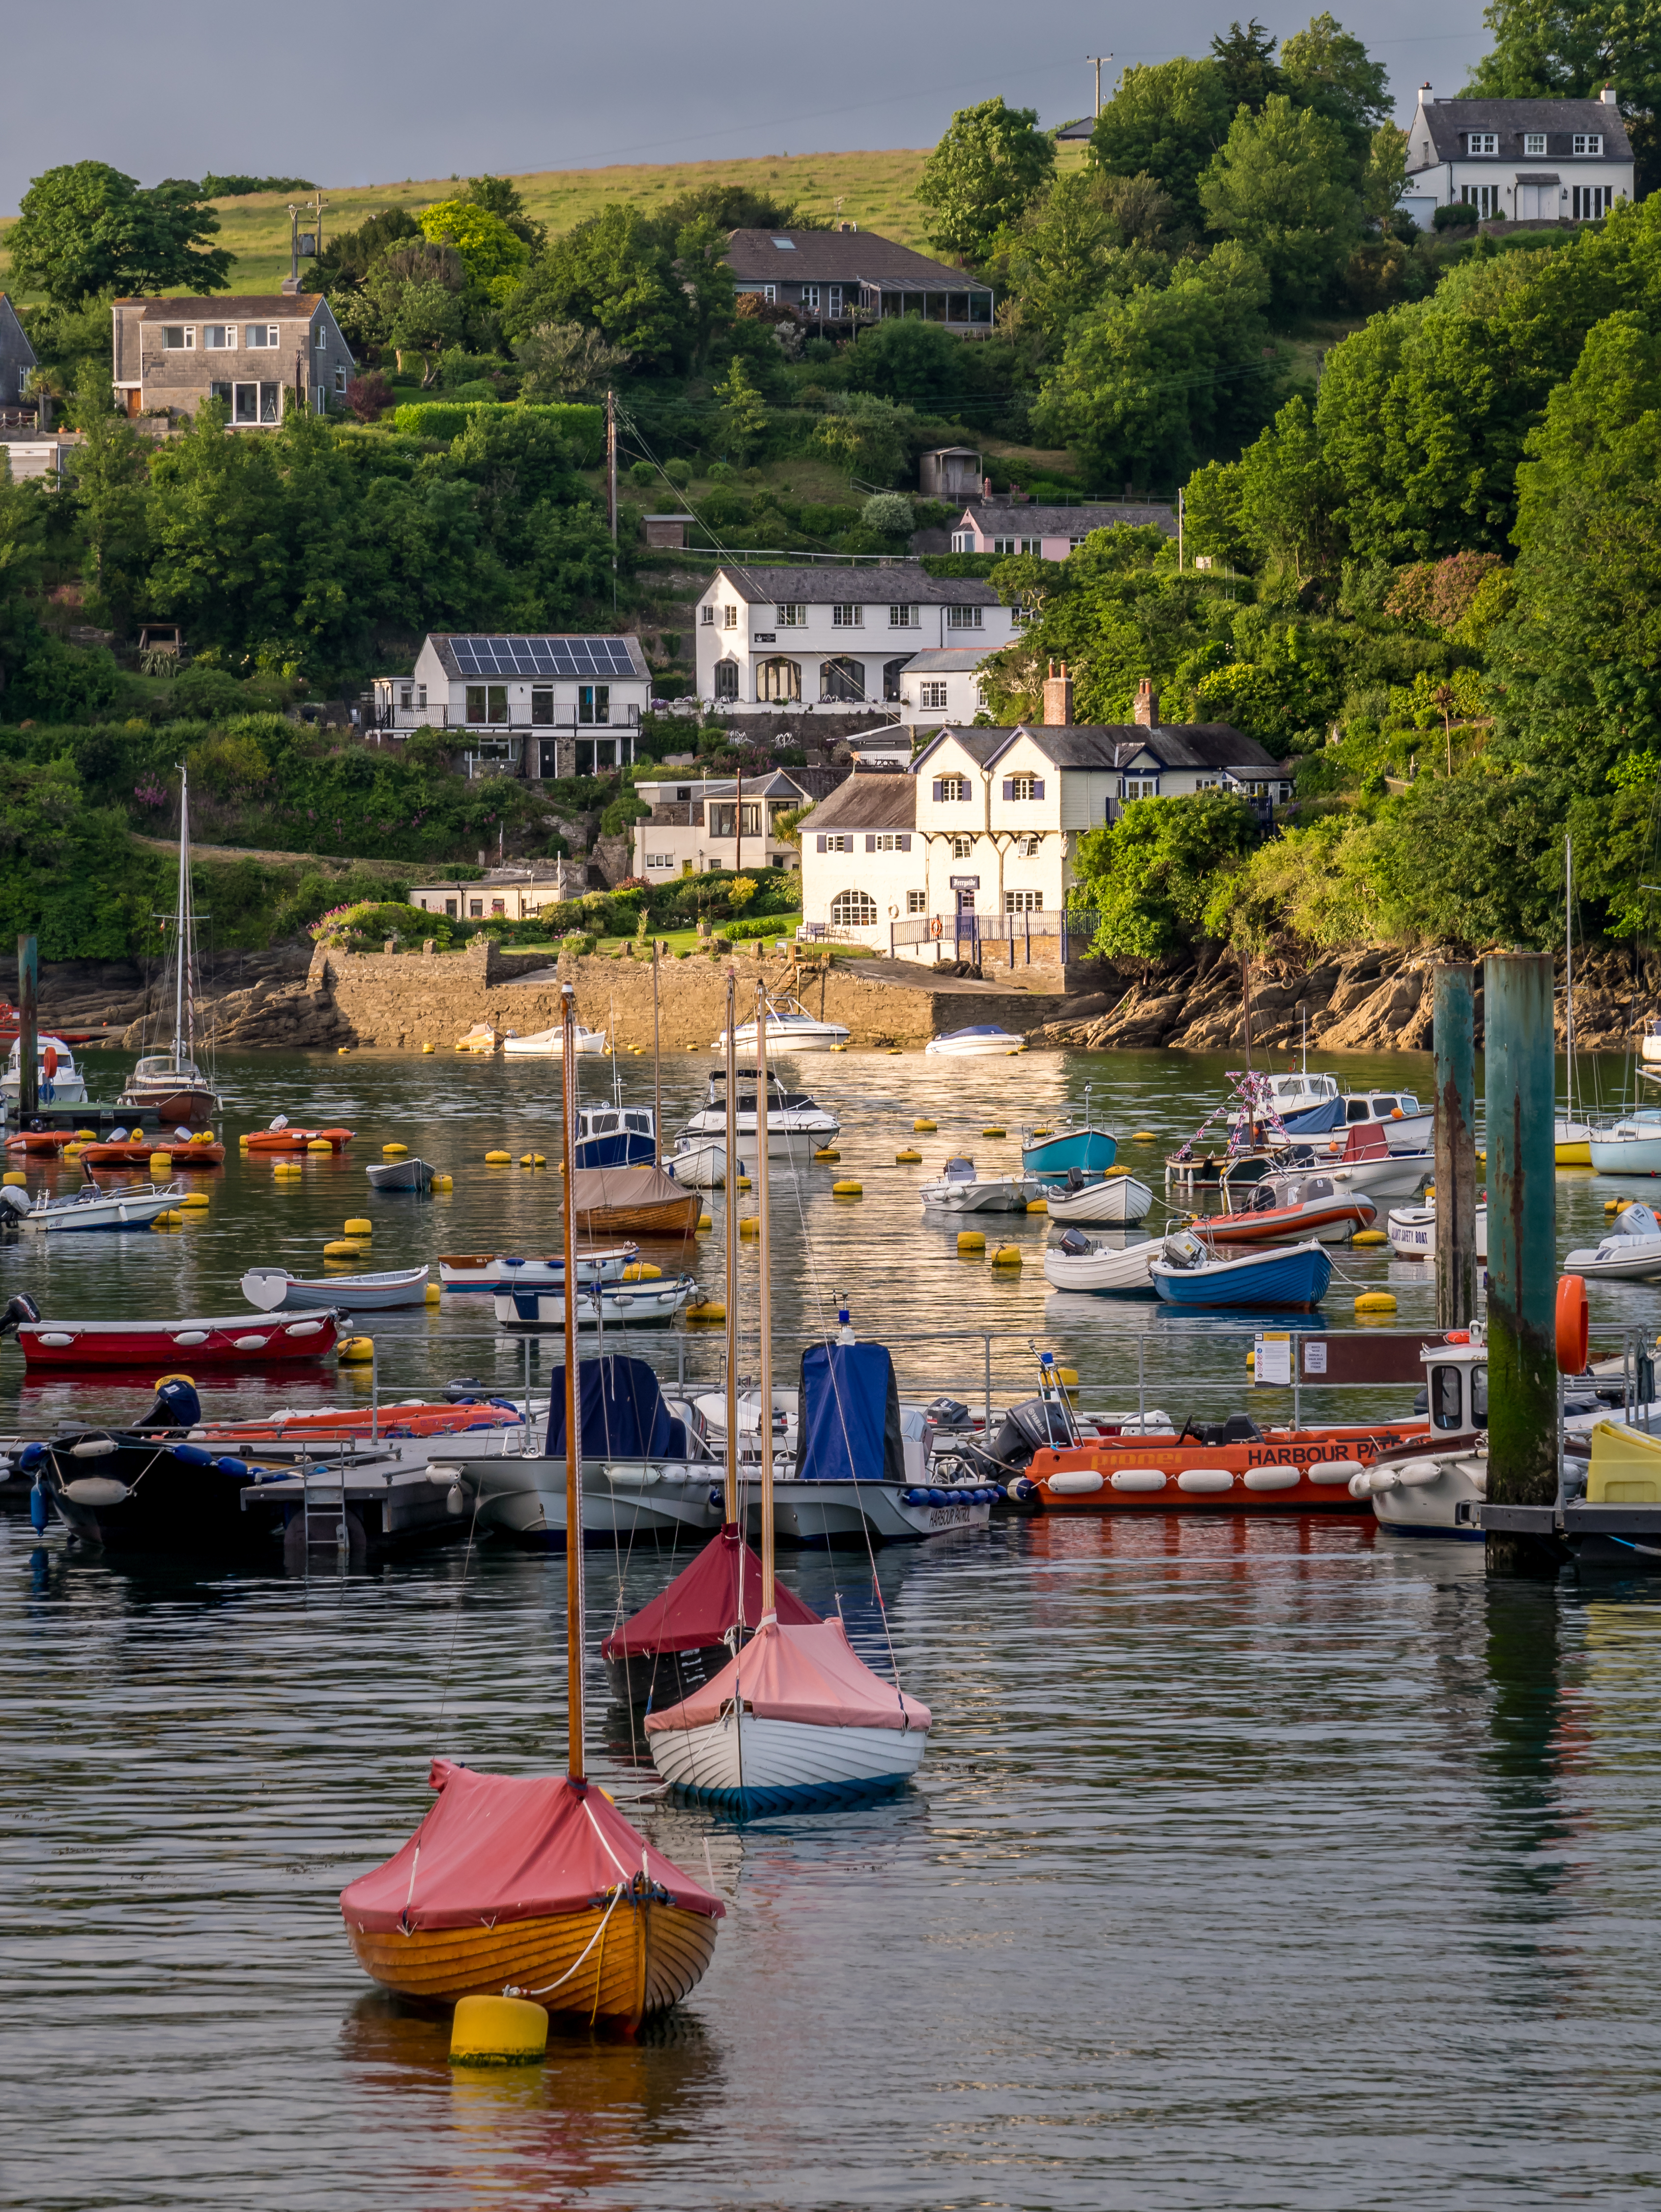 android miscellaneous, boats, water, building, miscellanea, hill